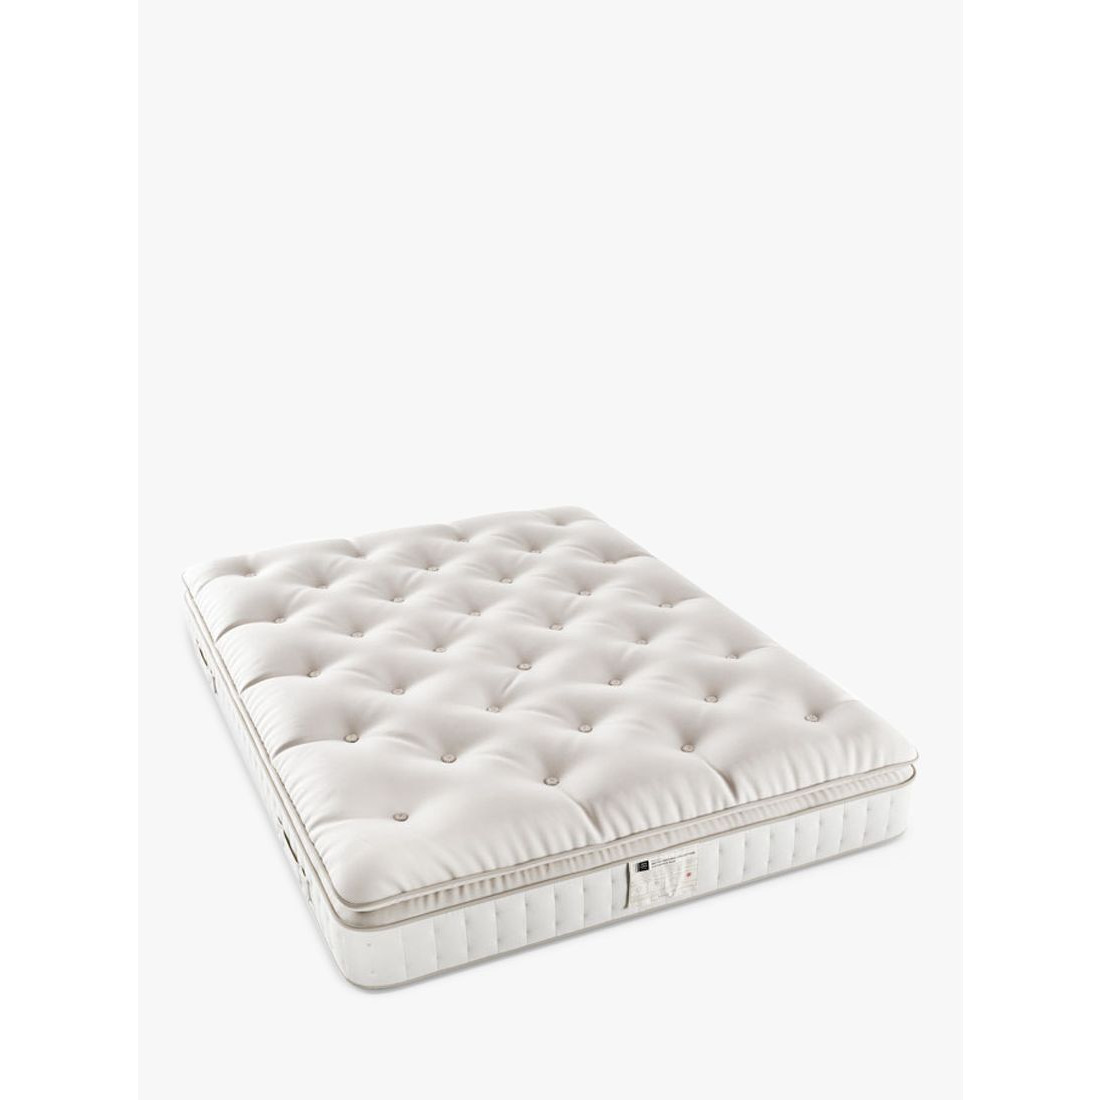 John Lewis British Natural Collection Cotswold Pillowtop 10250 Mattress, Firmer Tension, Small Double - image 1